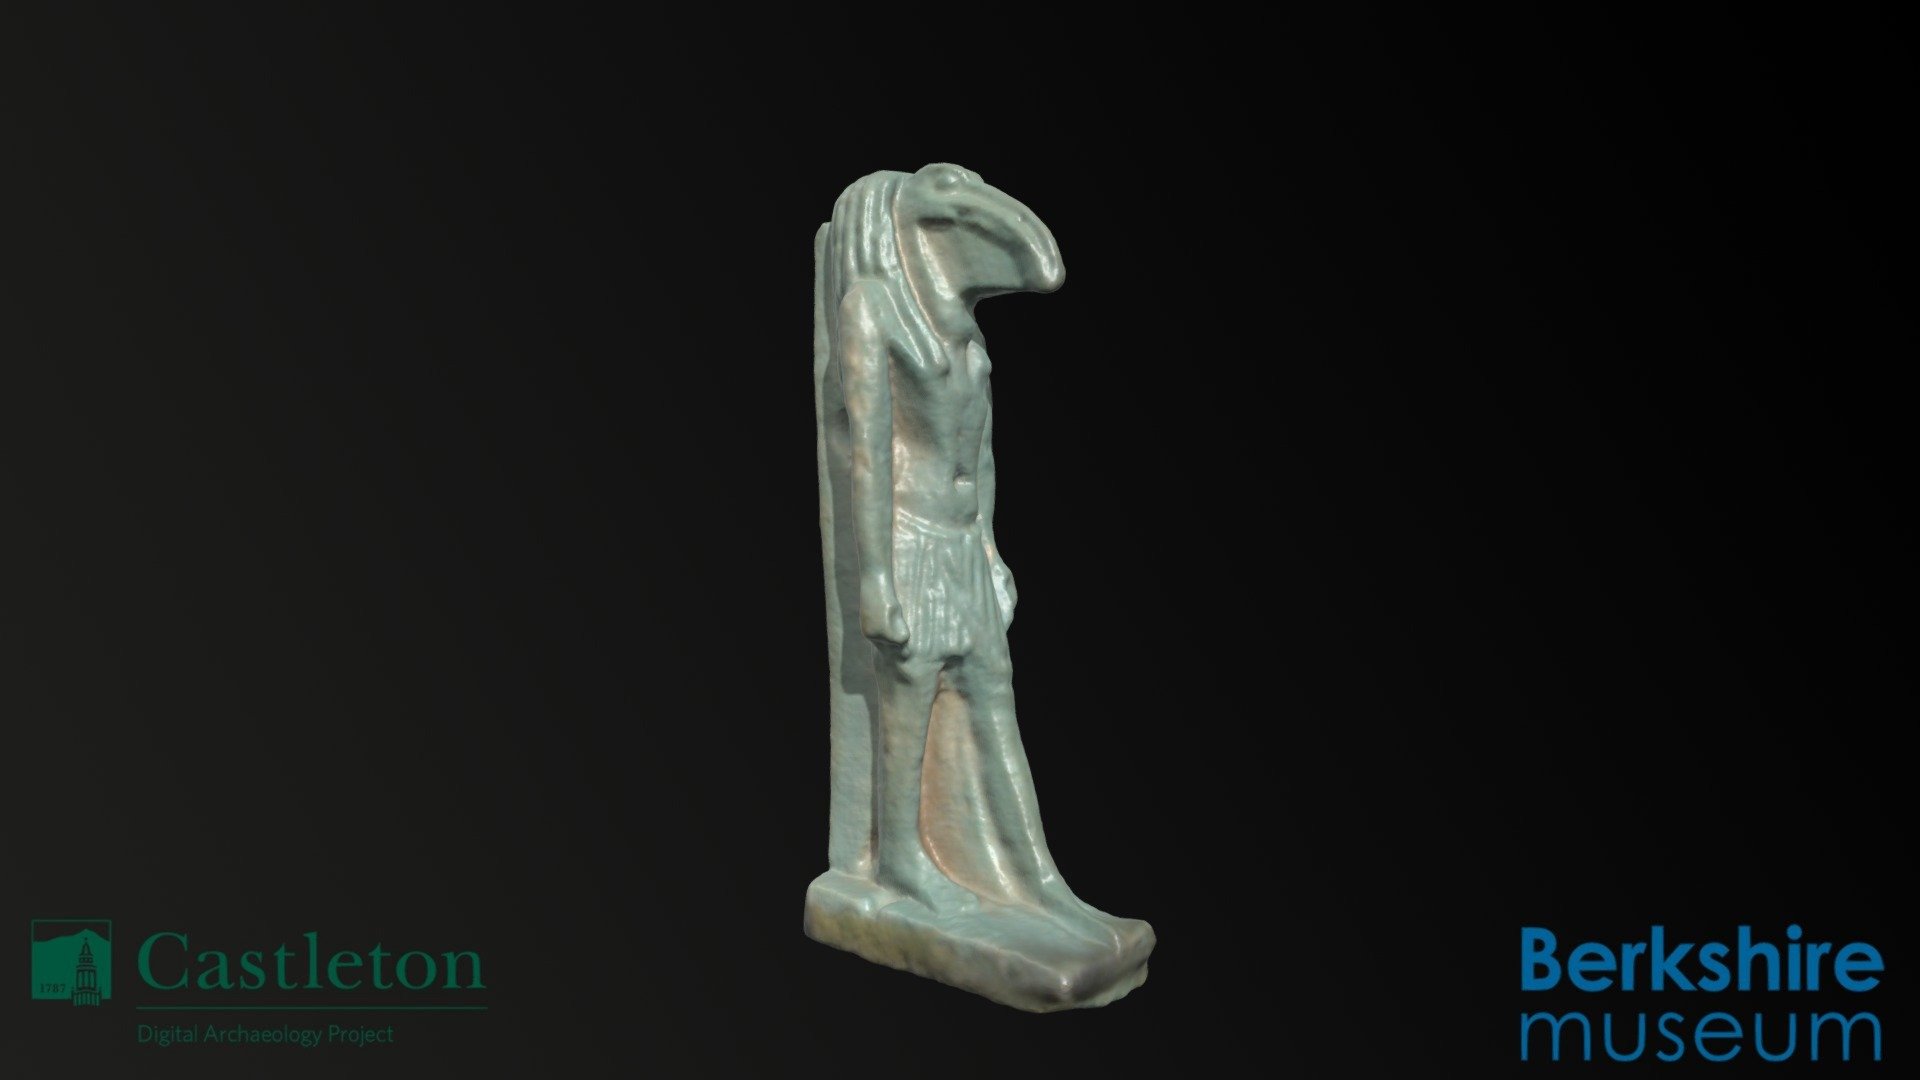 Egyptian Thoth amulet. Blue faience. Egyptian 3rd Intermediate Period. Collections of Berkshire Museum, Pittsfield, Massachusetts, USA (https://berkshiremuseum.org/ See also https://sketchfab.com/CUDAP/collections/berkshire-museum). 1953.47.18J. Scanned at Berkshire Museum using an Artec Space Spider 3D scanner. Dimensions: 37.12 x 13.36 mm. ANT-3160 (3D Scanning and Digital Curation) final project (https://sketchfab.com/CUDAP/collections/ant-3160-projects) by Philip Williams, Fall 2021 3d model